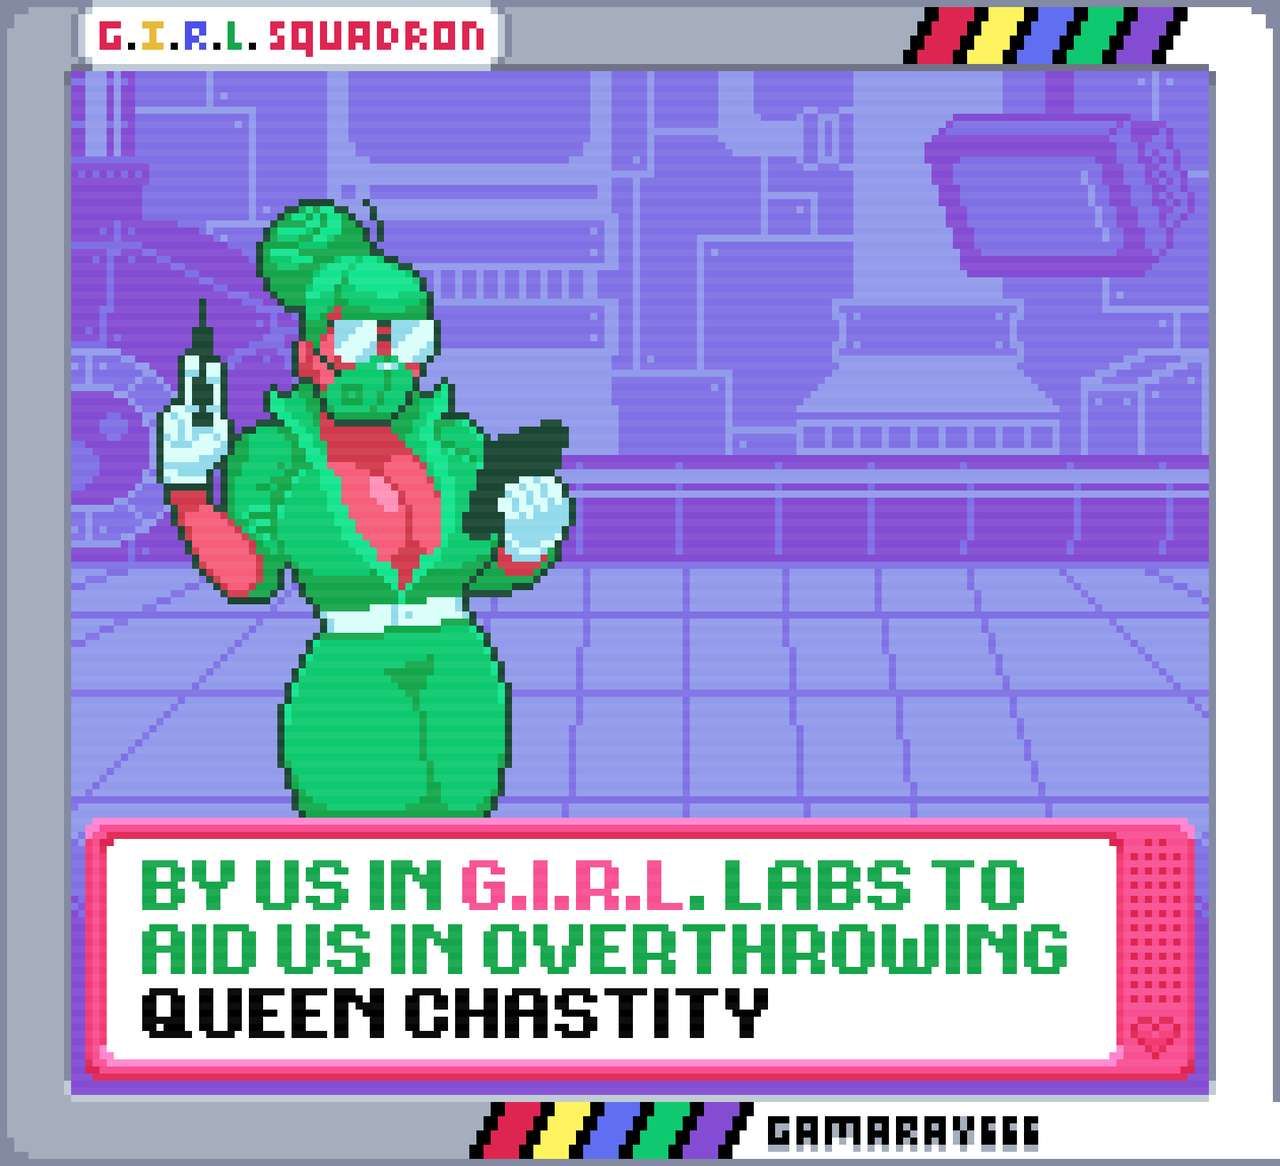 G. I. R. L. SQUADRON - A Choose Your Own Adventure 3